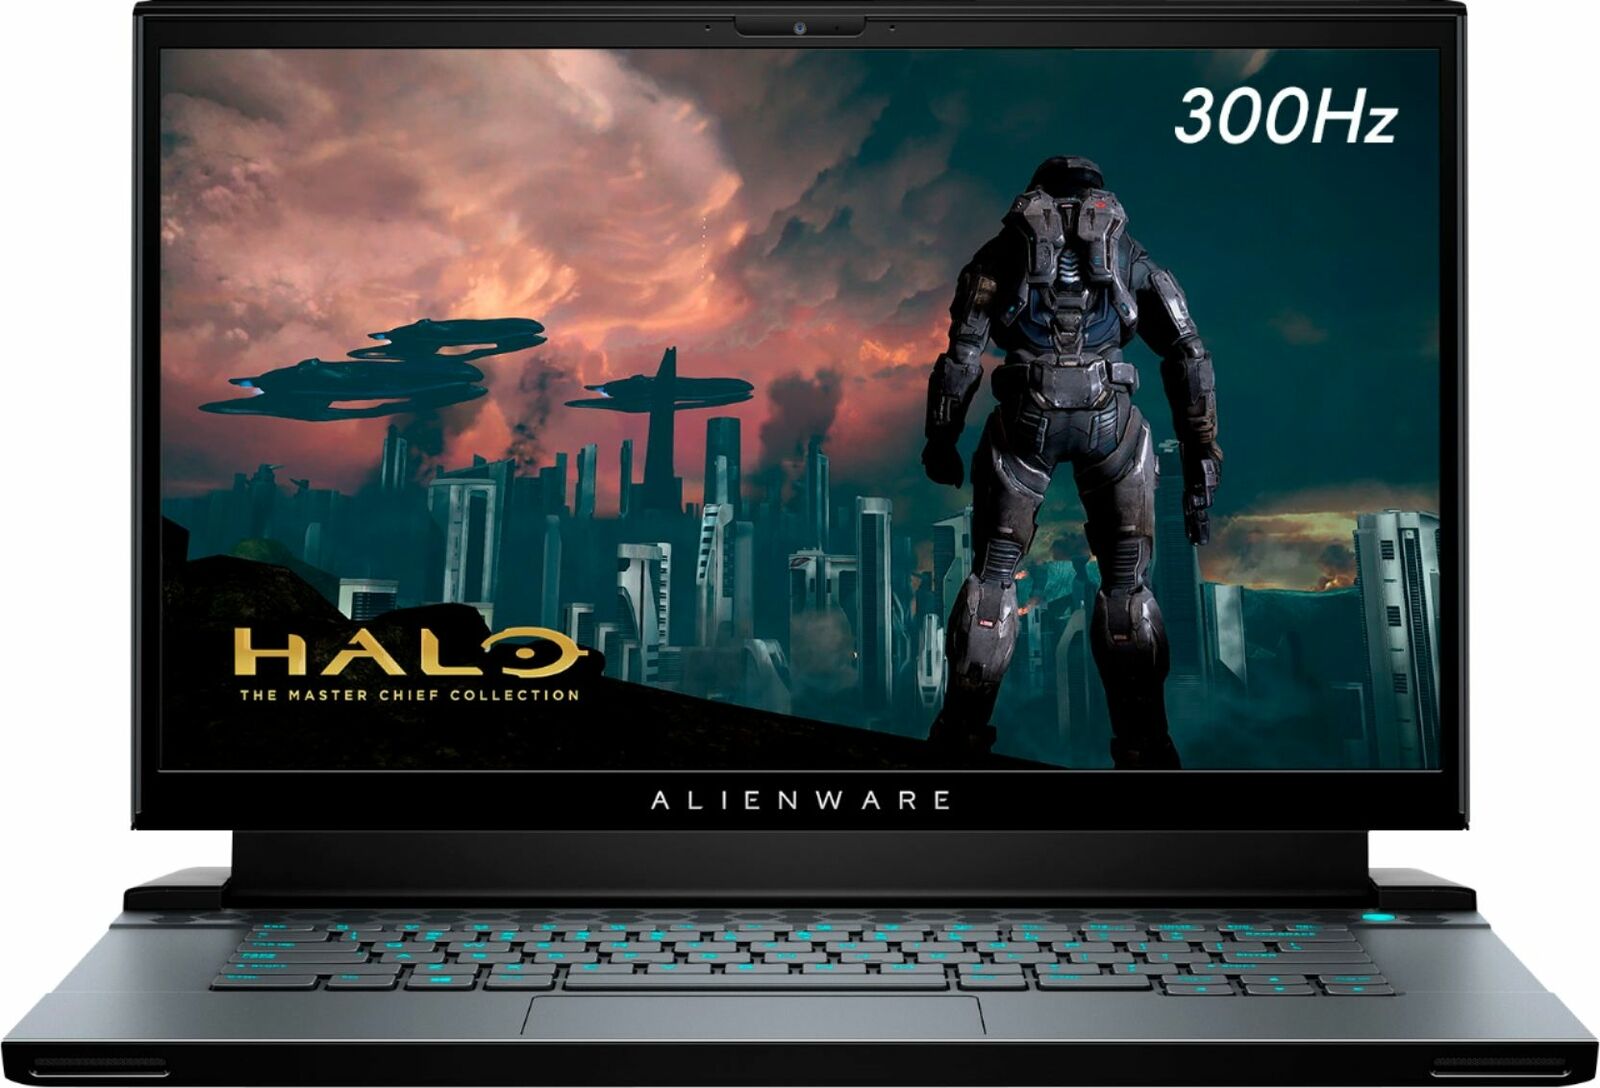 Brand New Alienware 15.6" Gaming Laptop - Core i7-10750H - 16GB RAM - 512GB SSD